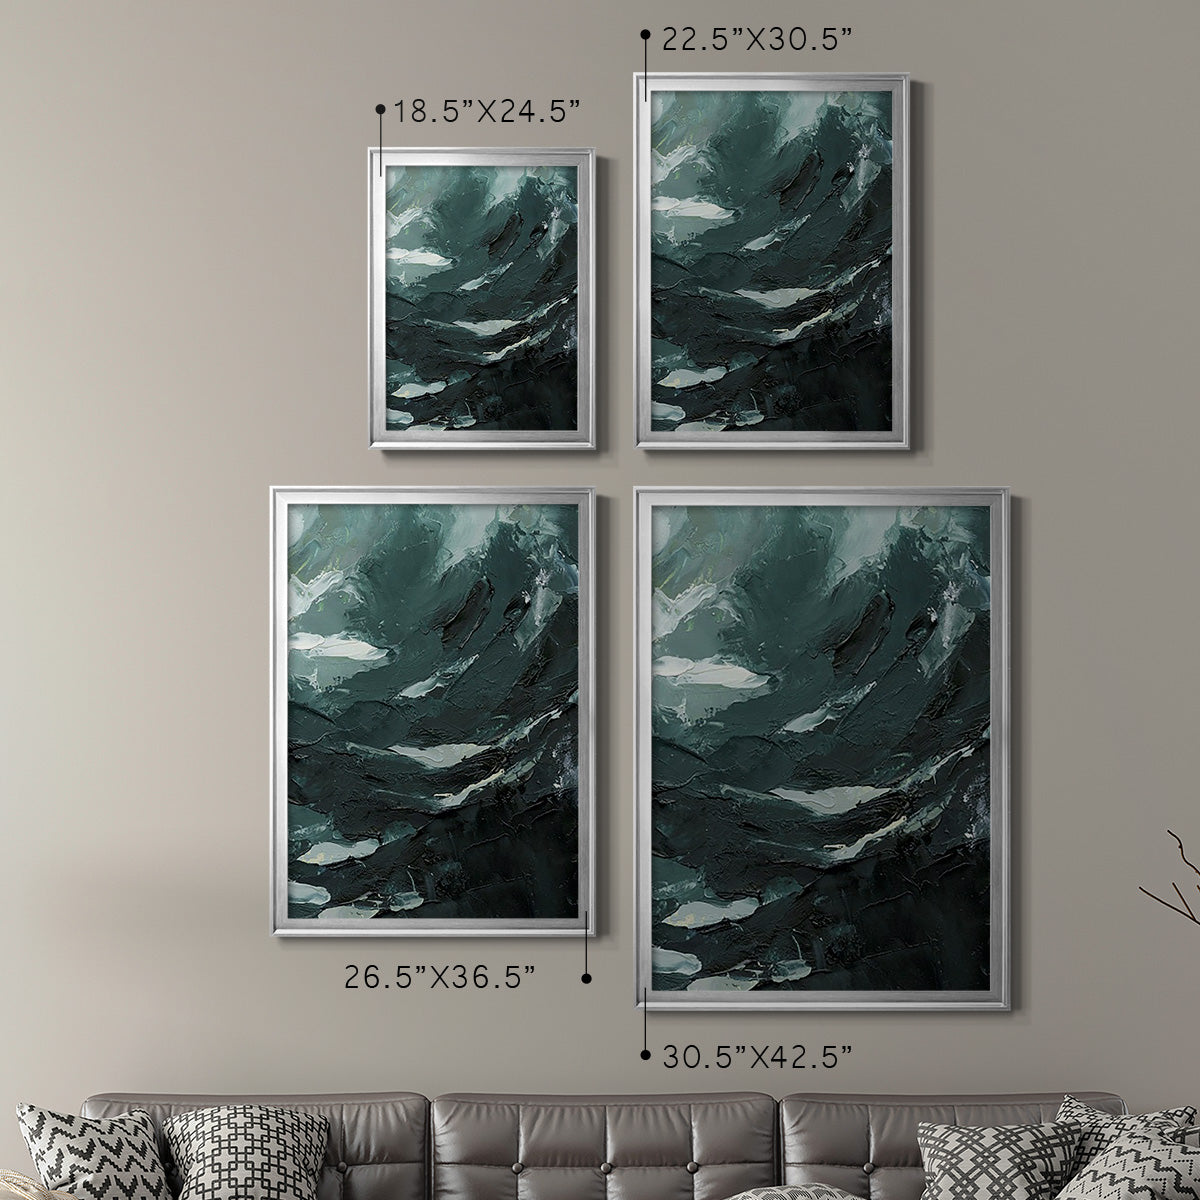 Lost in the Sea II Premium Framed Print - Ready to Hang